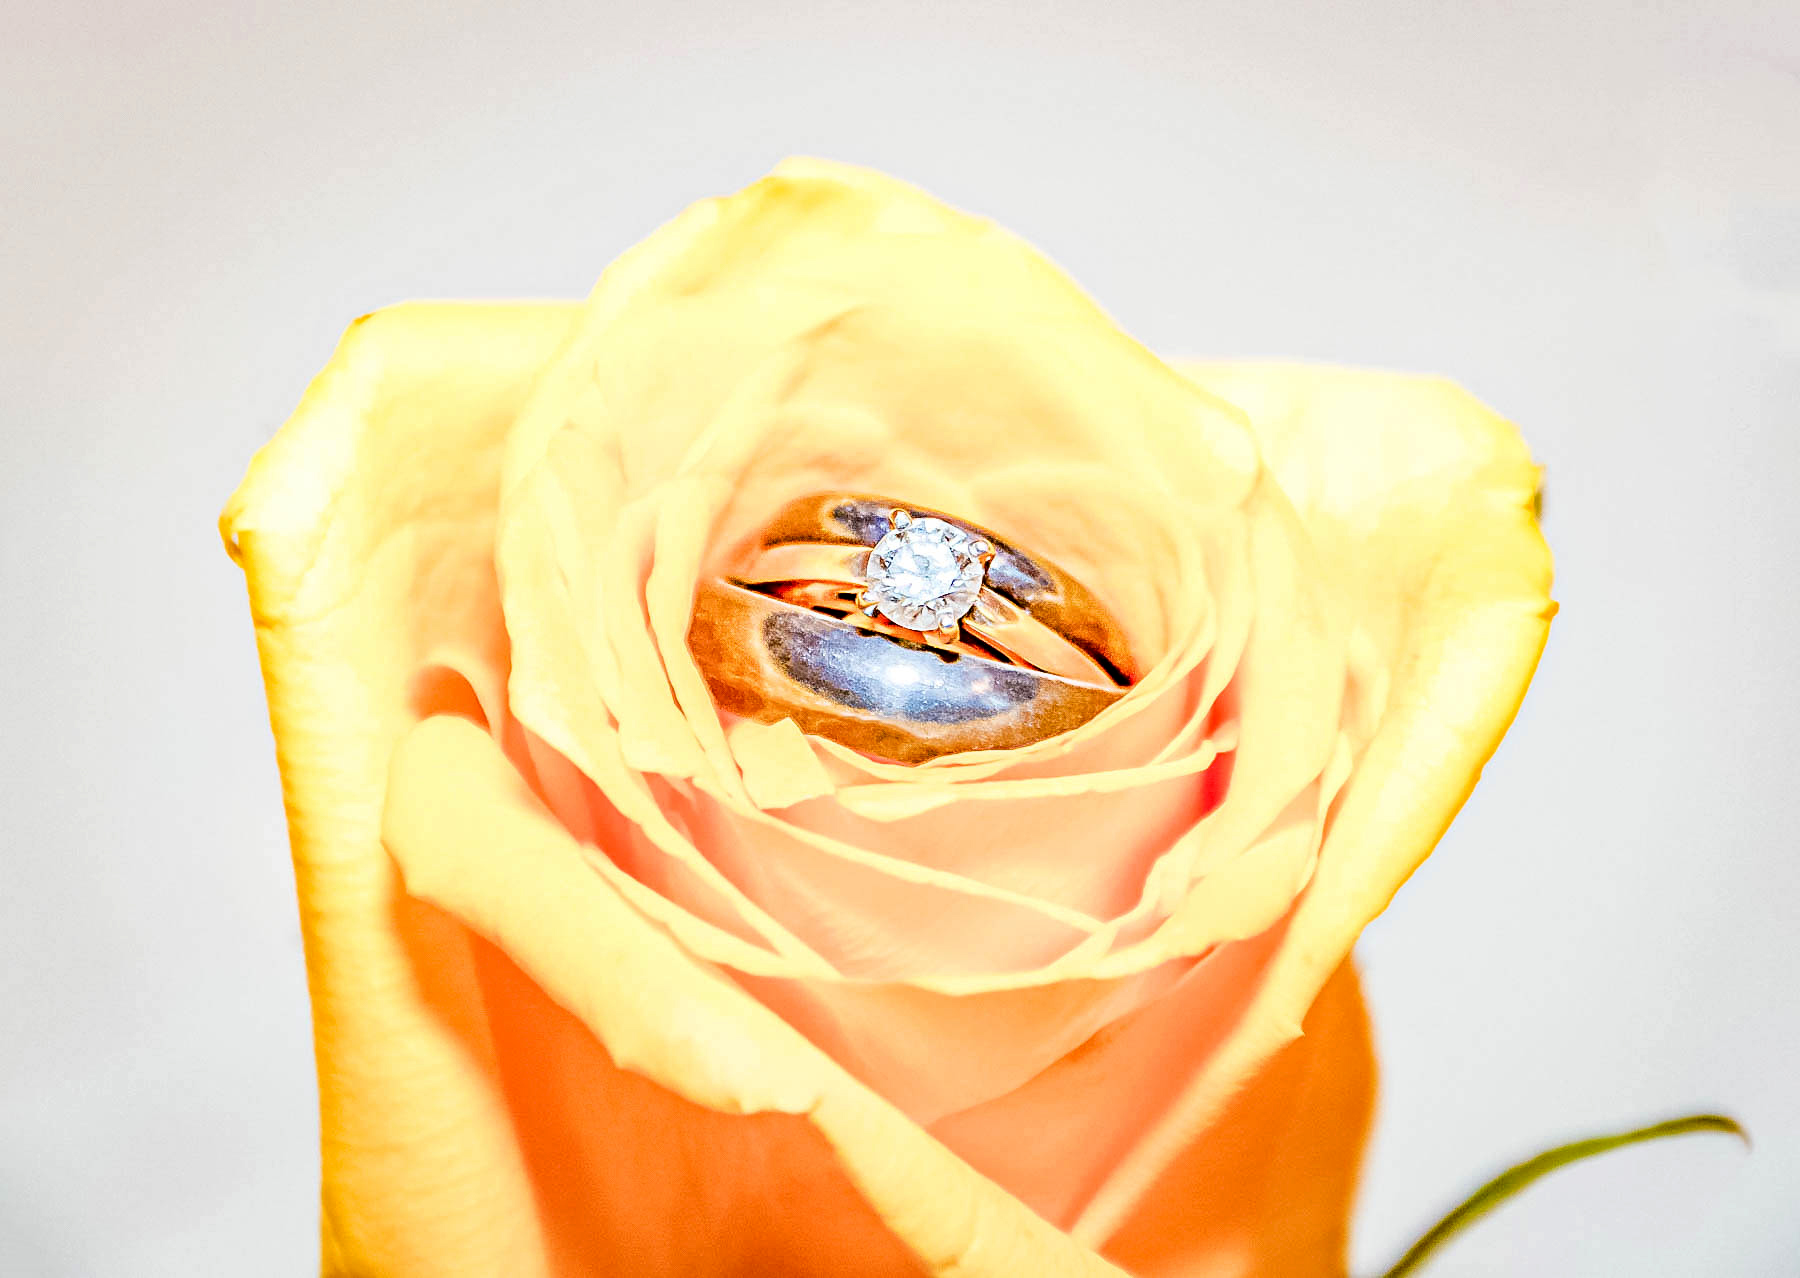 wedding rings placed in the center of a yellow rose for photo purposes